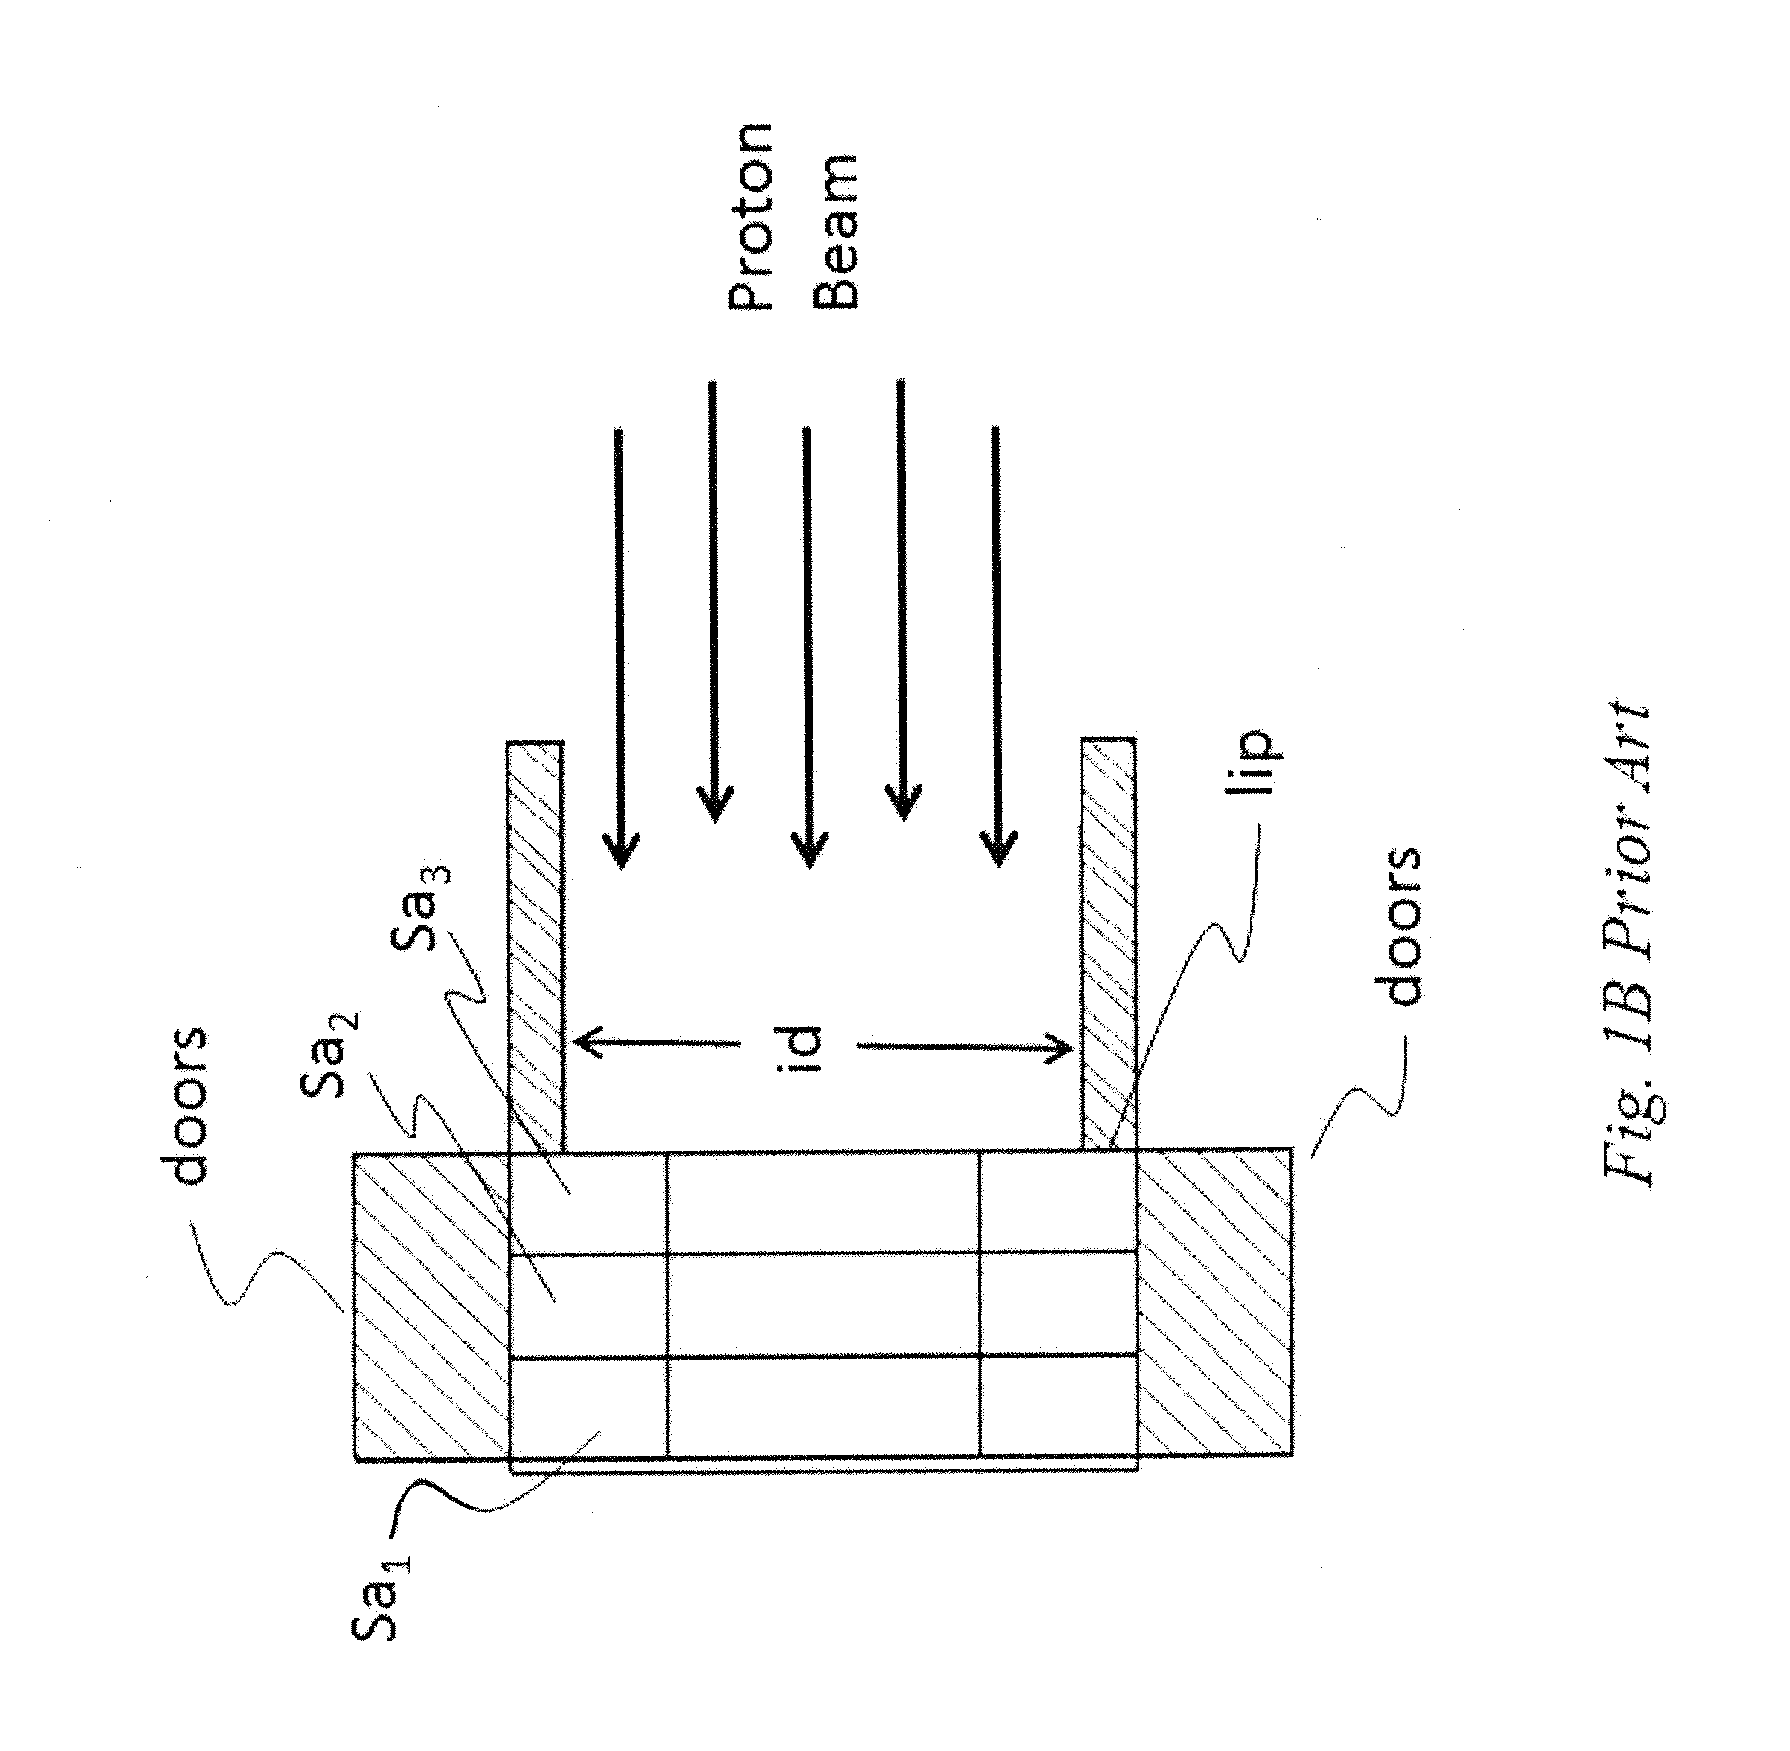 Integrated beam modifying assembly for use with a proton beam therapy machine